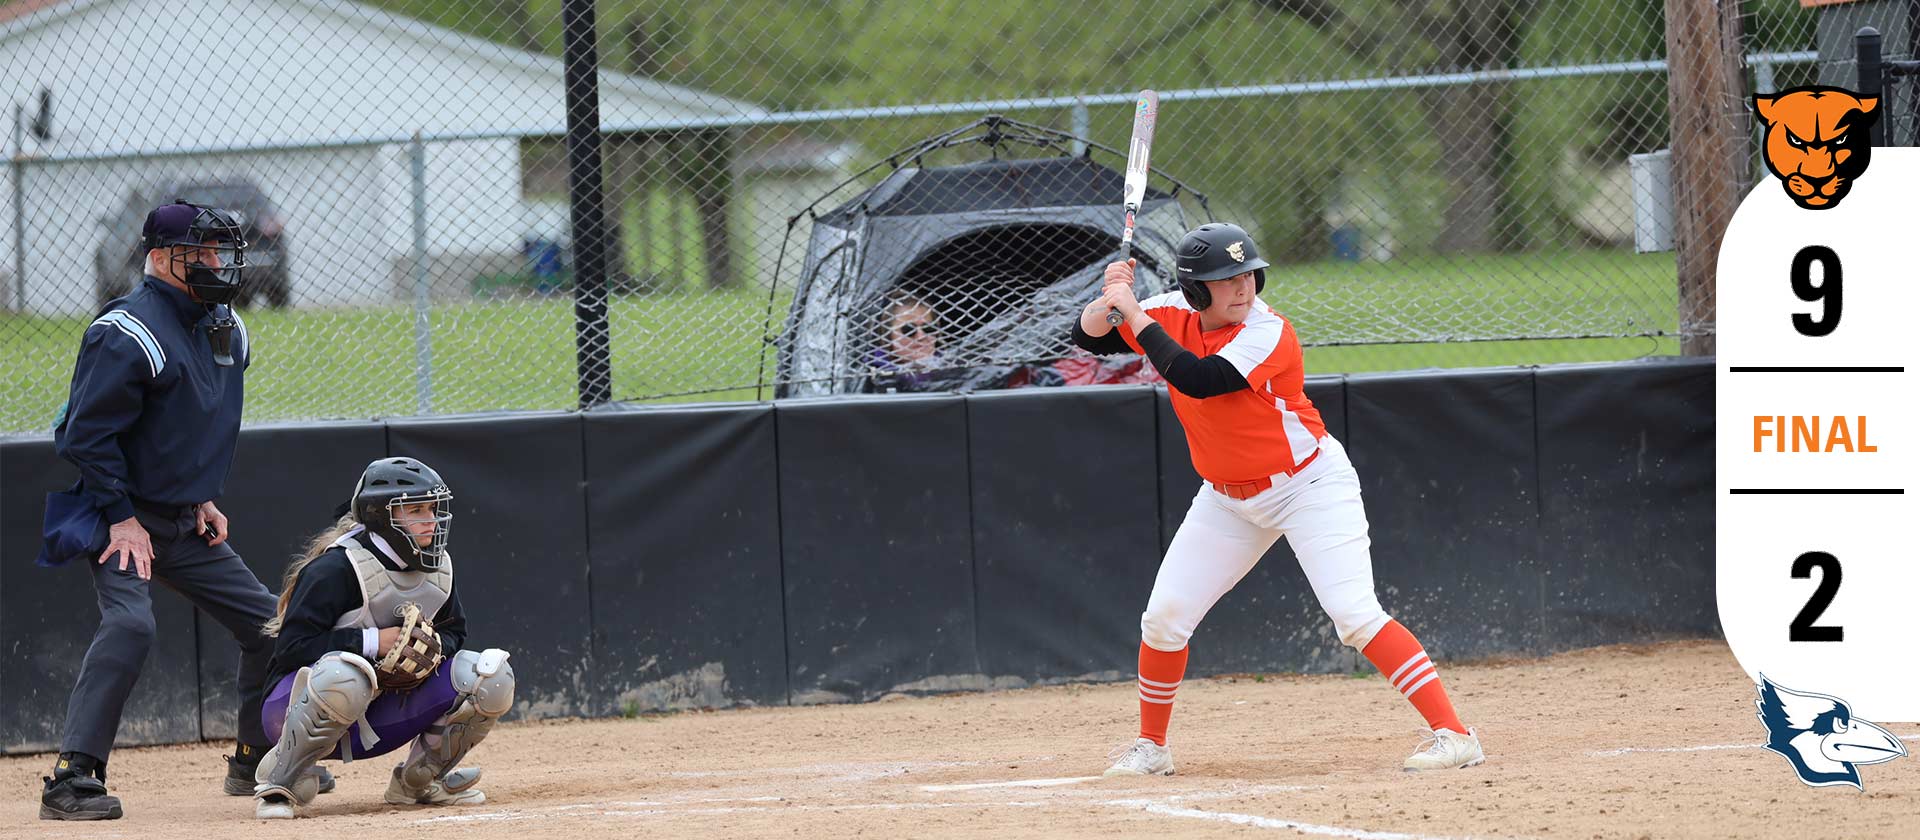 Softball qualifies for Peoria with 9-2 SLIAC tournament win over Westminster